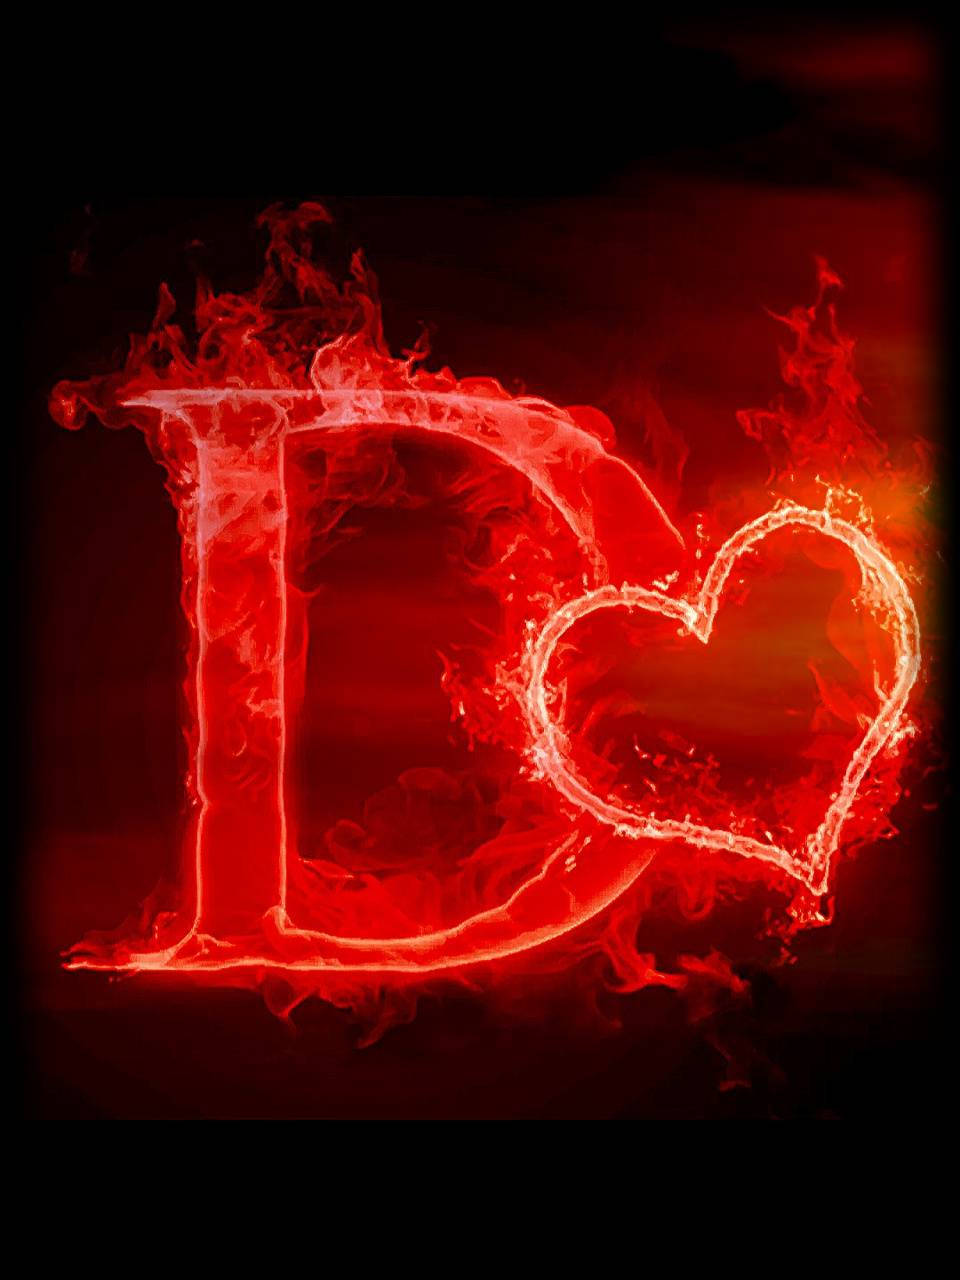 Flaming Red D With A Heart